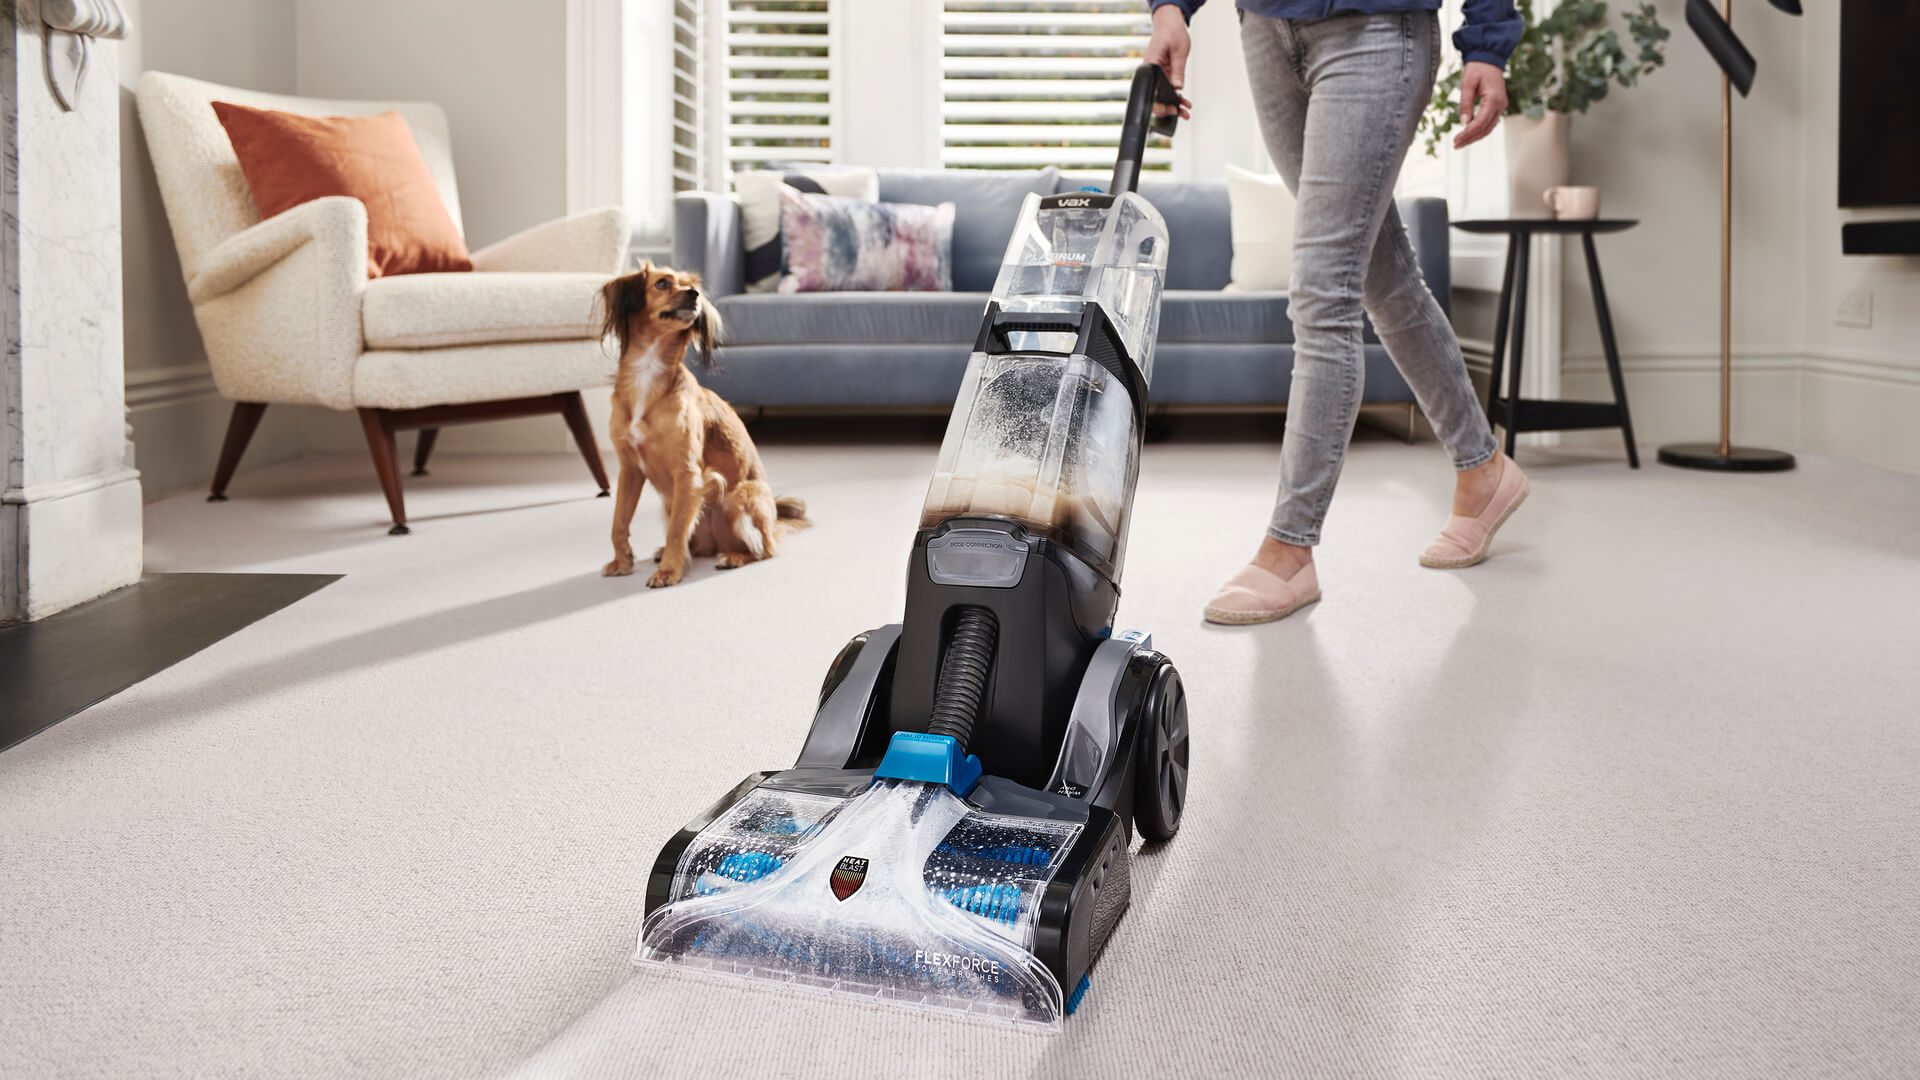 The Ultimate Guide To Finding The Perfect Carpet Cleaning London Service - HeckHome